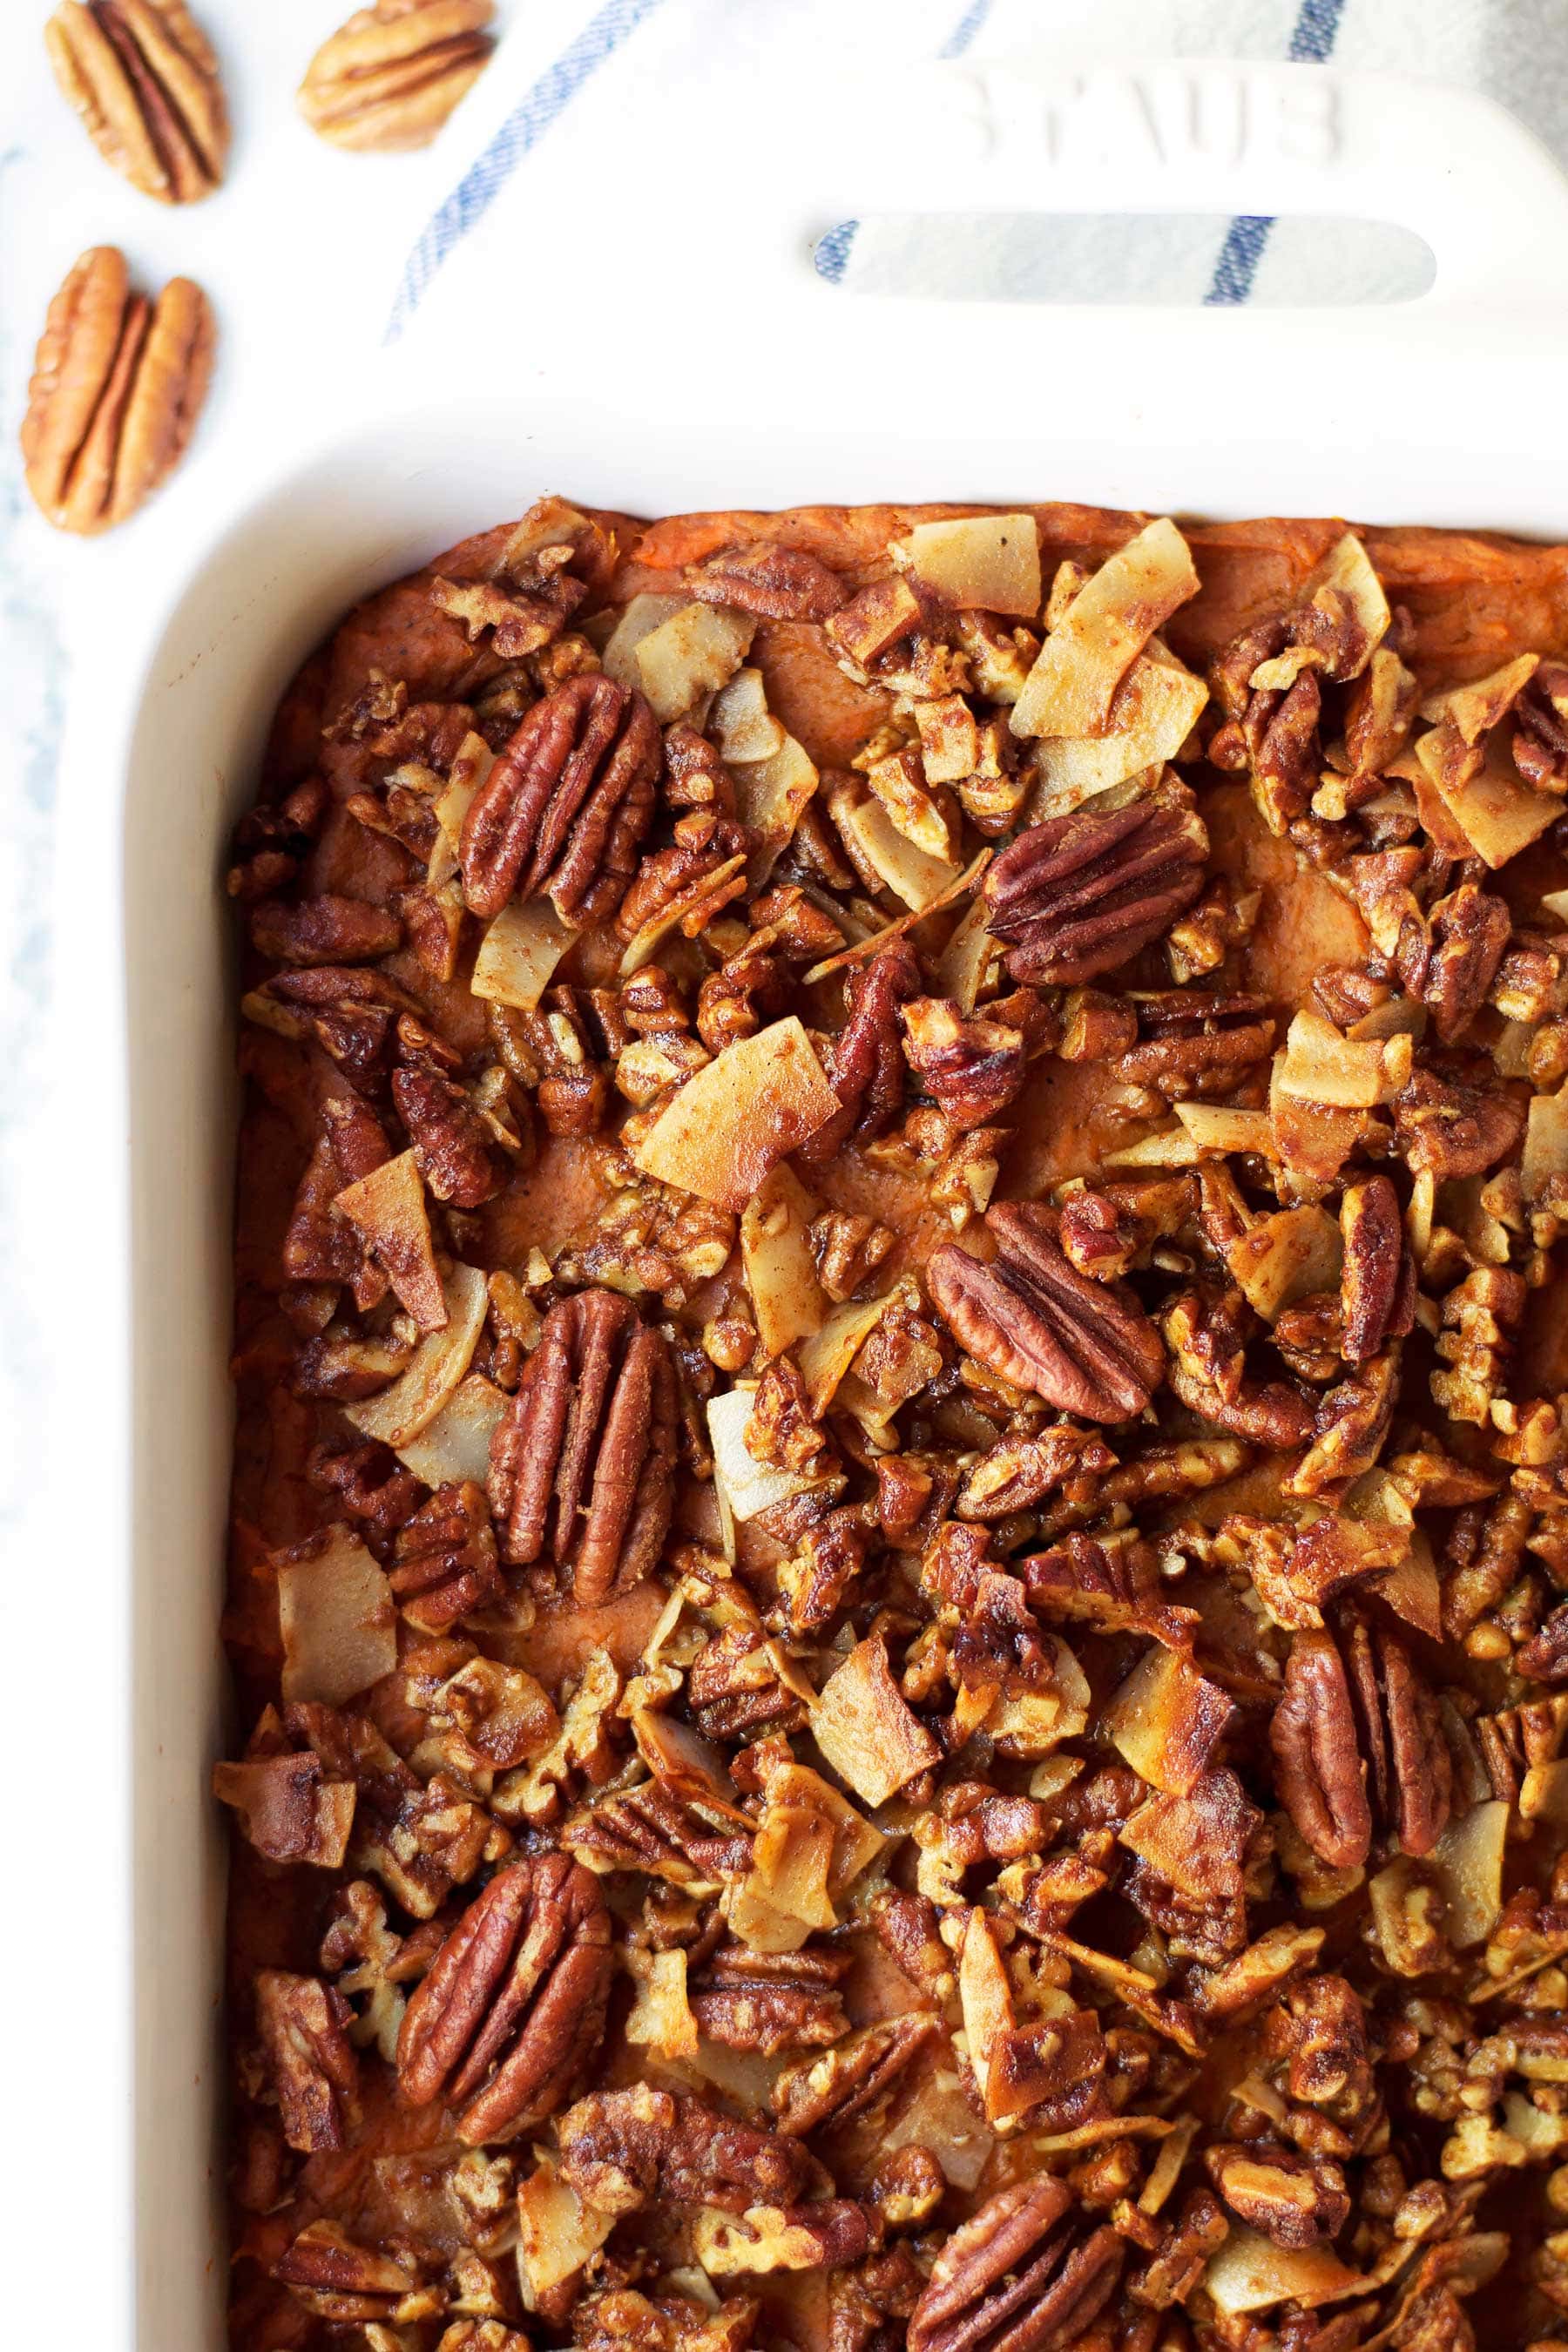 Pumpkin pie meets sweet potato casserole in this easy holiday side dish! This Pumpkin Pie Sweet Potato Casserole with Coconut Pecan Crumble is the perfect paleo Thanksgiving recipe. The perfect addition to you Thanksgiving and Christmas table. Healthy Thanksgiving side dish. Healthy Christmas side dish. Paleo Christmas recipe. #thanksgivingsidedish #healthythanksgiving #healthychristmas #sweetpotato #pumpkinpie #sweetpotatocasserole #yams #maplesyrup #pecans #coconut #glutenfreethanksgiving #glutenfree #dairyfree